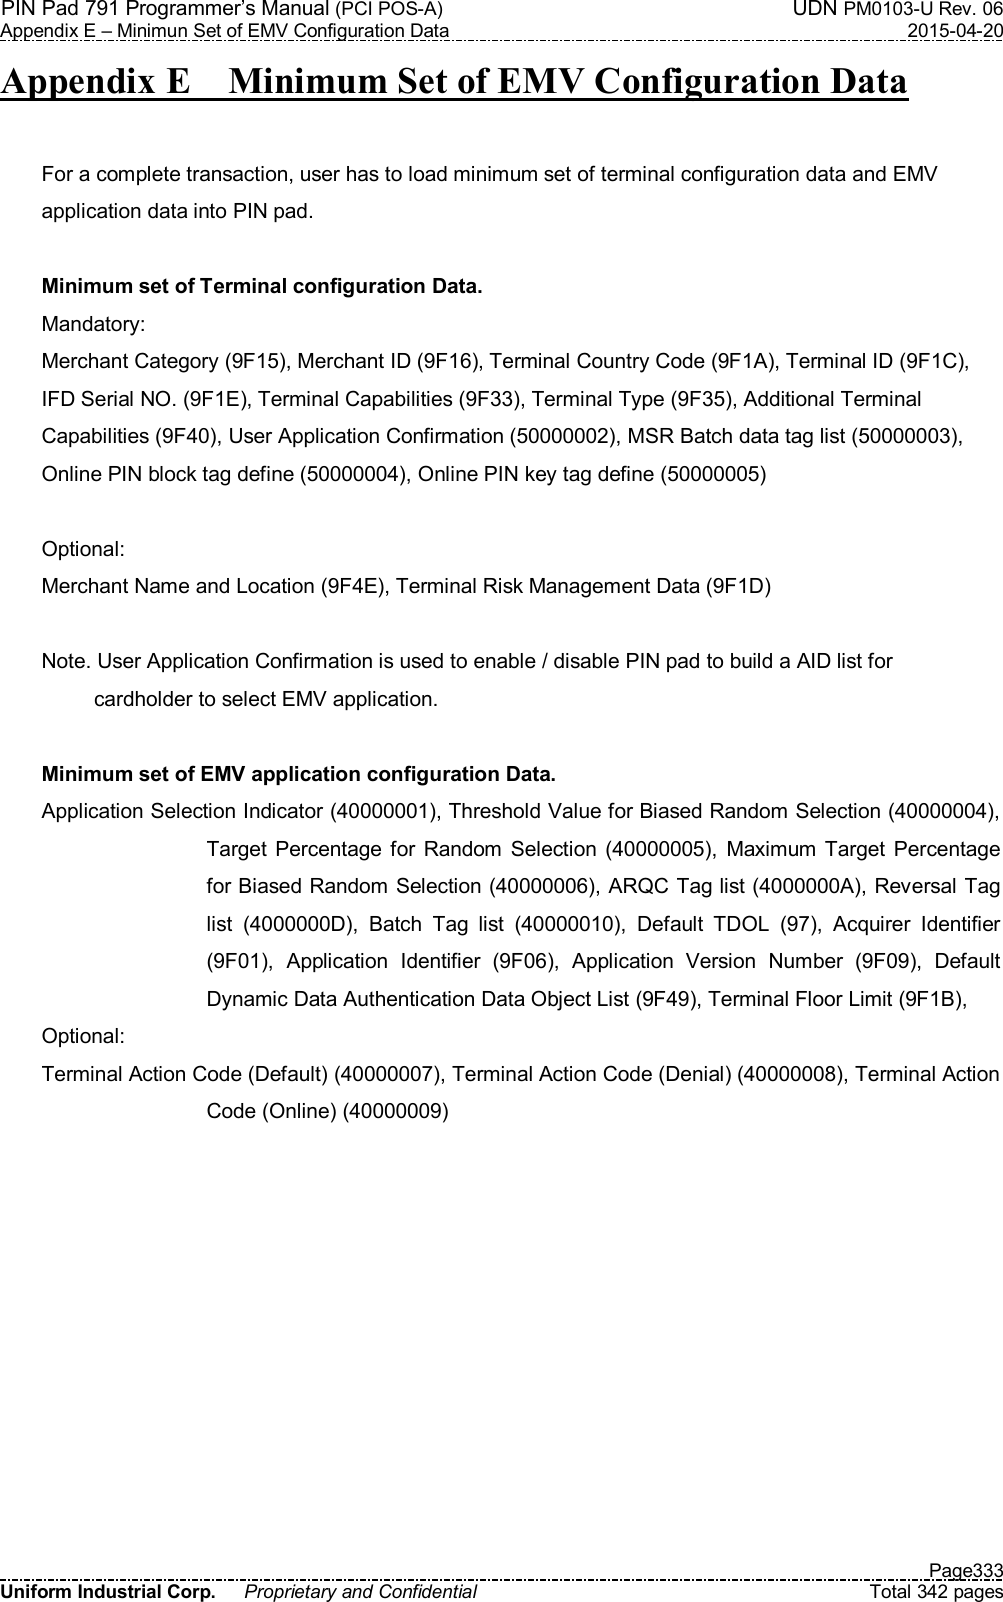 PIN Pad 791 Programmer’s Manual (PCI POS-A)    UDN PM0103-U Rev. 06 Appendix E – Minimun Set of EMV Configuration Data  2015-04-20   Page333 Uniform Industrial Corp.  Proprietary and Confidential  Total 342 pages Appendix E    Minimum Set of EMV Configuration Data  For a complete transaction, user has to load minimum set of terminal configuration data and EMV   application data into PIN pad.  Minimum set of Terminal configuration Data. Mandatory: Merchant Category (9F15), Merchant ID (9F16), Terminal Country Code (9F1A), Terminal ID (9F1C),   IFD Serial NO. (9F1E), Terminal Capabilities (9F33), Terminal Type (9F35), Additional Terminal   Capabilities (9F40), User Application Confirmation (50000002), MSR Batch data tag list (50000003),   Online PIN block tag define (50000004), Online PIN key tag define (50000005)  Optional: Merchant Name and Location (9F4E), Terminal Risk Management Data (9F1D)  Note. User Application Confirmation is used to enable / disable PIN pad to build a AID list for   cardholder to select EMV application.  Minimum set of EMV application configuration Data. Application Selection Indicator (40000001), Threshold Value for Biased Random Selection (40000004), Target Percentage for  Random  Selection  (40000005),  Maximum  Target Percentage for Biased Random Selection (40000006), ARQC Tag list (4000000A), Reversal Tag list  (4000000D),  Batch  Tag  list  (40000010),  Default  TDOL  (97),  Acquirer  Identifier (9F01),  Application  Identifier  (9F06),  Application  Version  Number  (9F09),  Default Dynamic Data Authentication Data Object List (9F49), Terminal Floor Limit (9F1B),   Optional: Terminal Action Code (Default) (40000007), Terminal Action Code (Denial) (40000008), Terminal Action Code (Online) (40000009)  